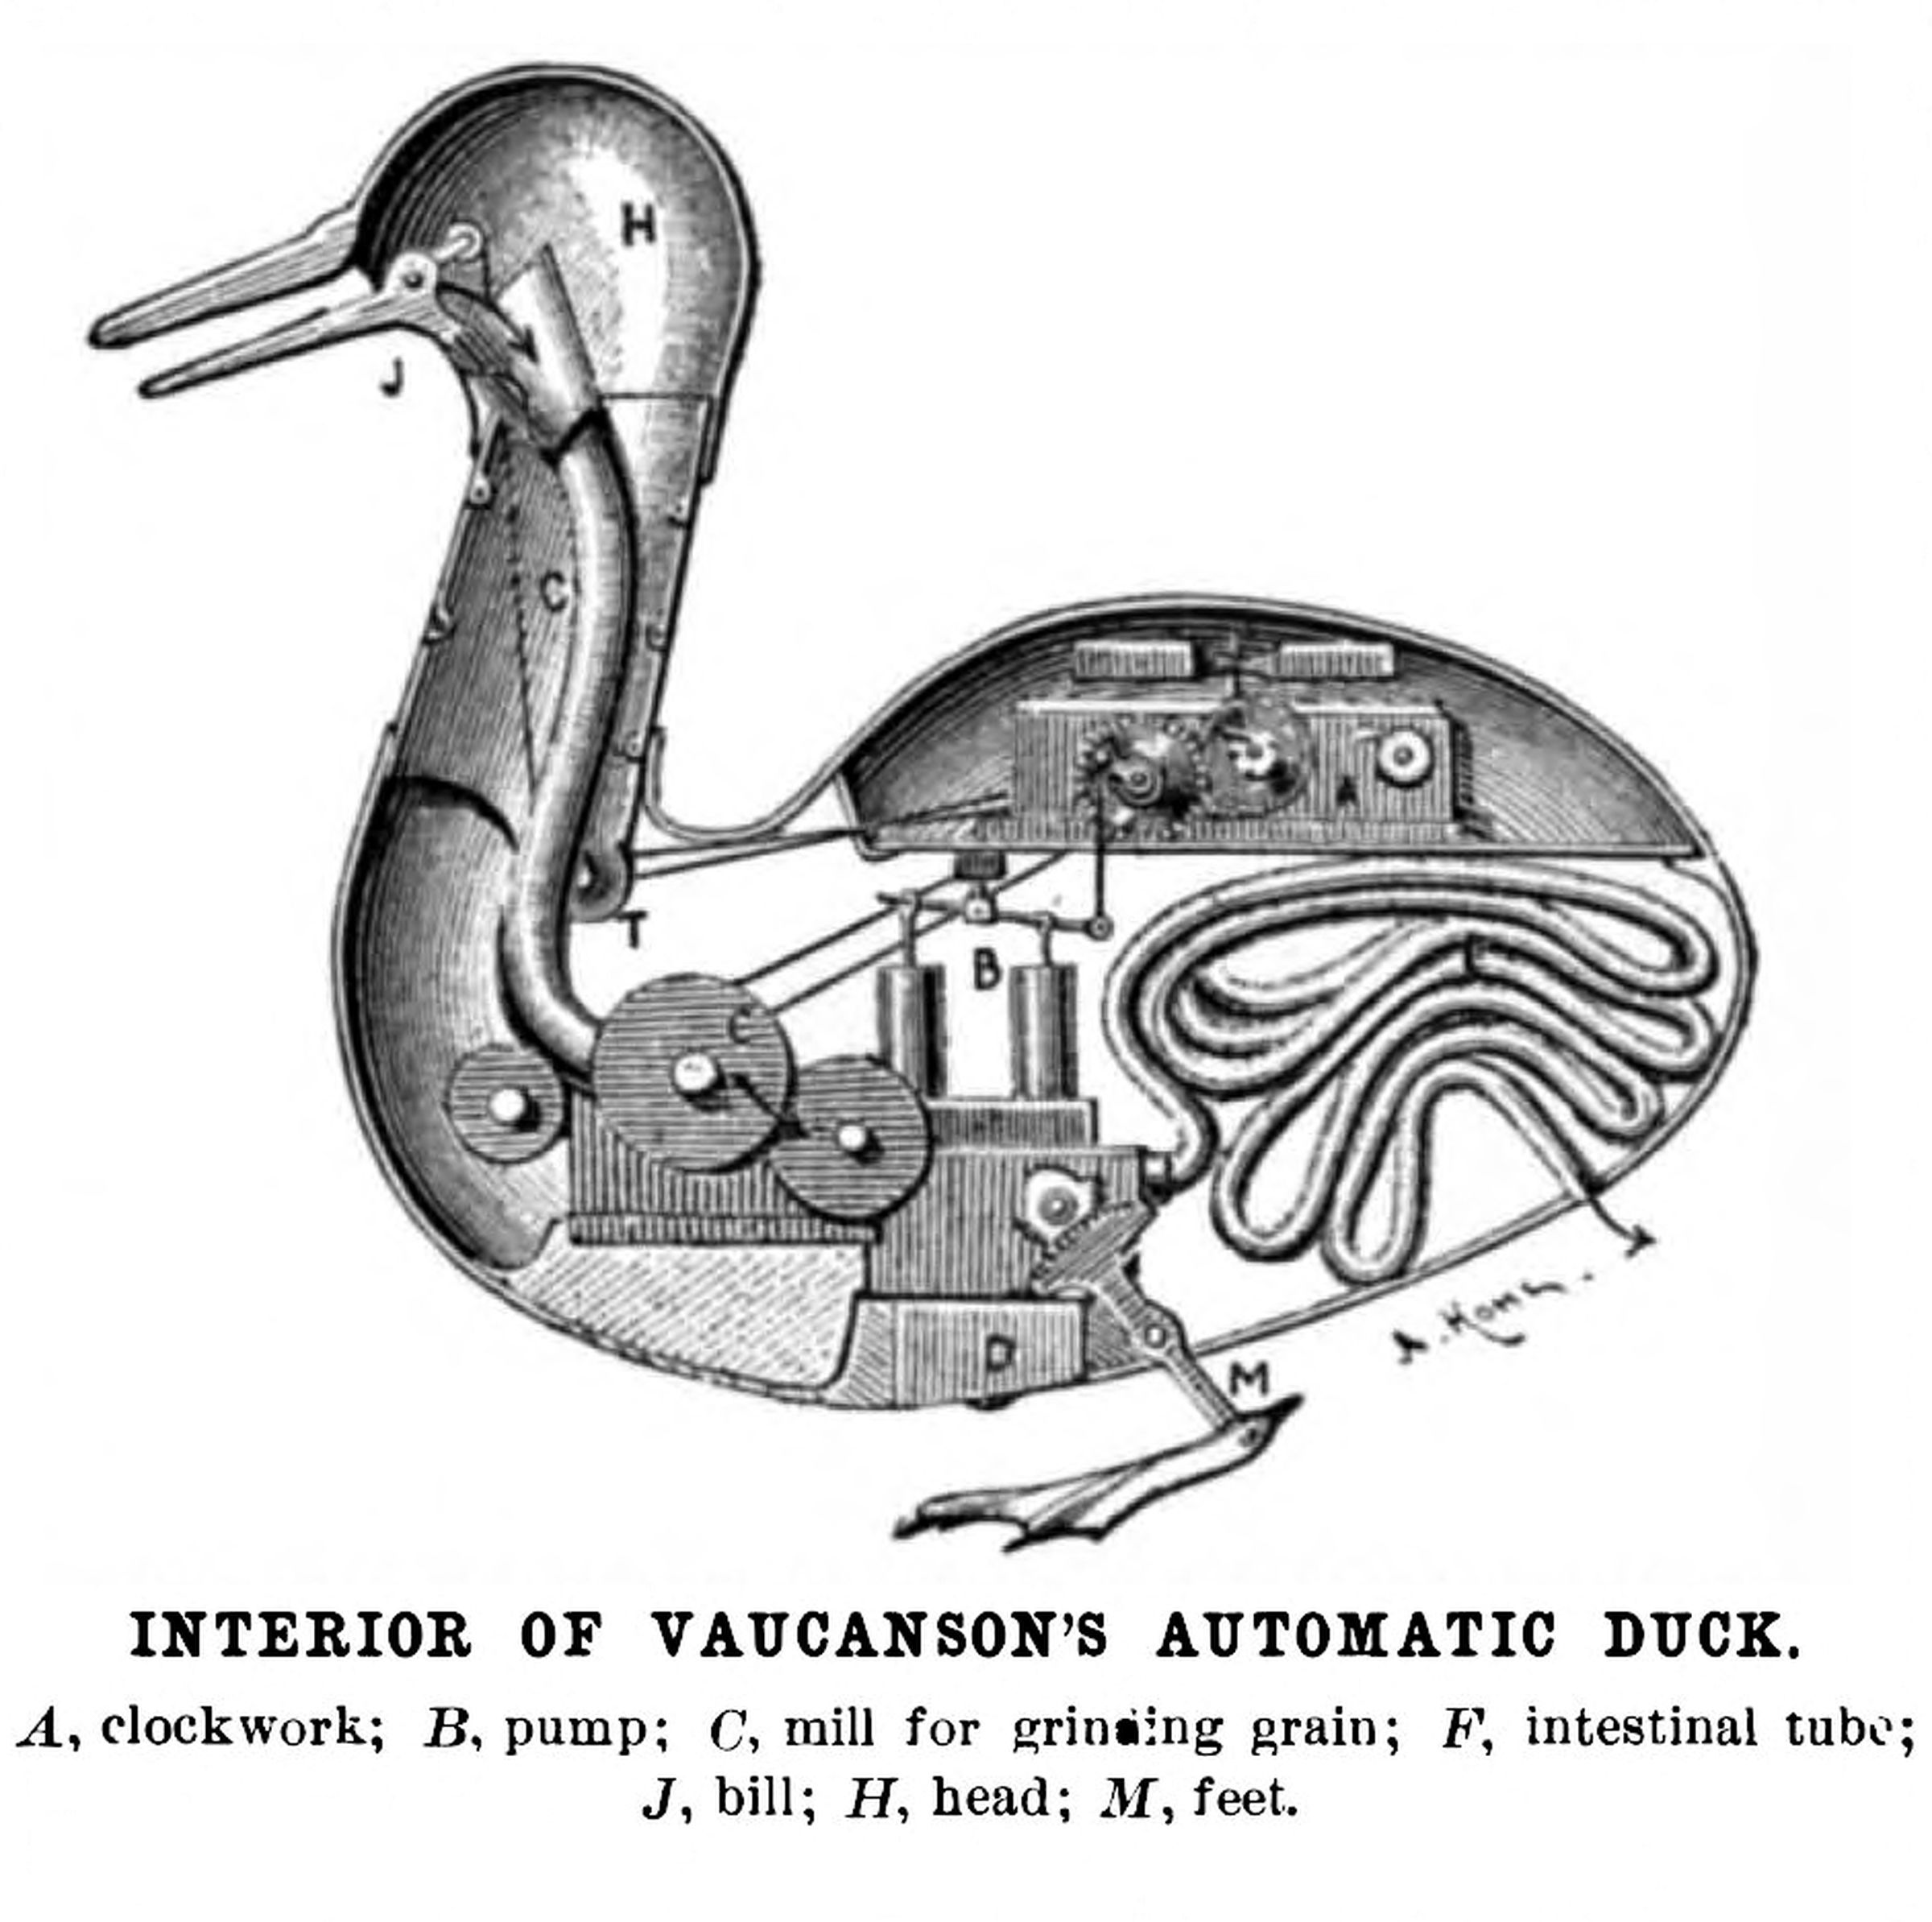 A diagram of Jacques de Vaucanson’s digesting duck (that mistakenly assumed the food was being processed). 